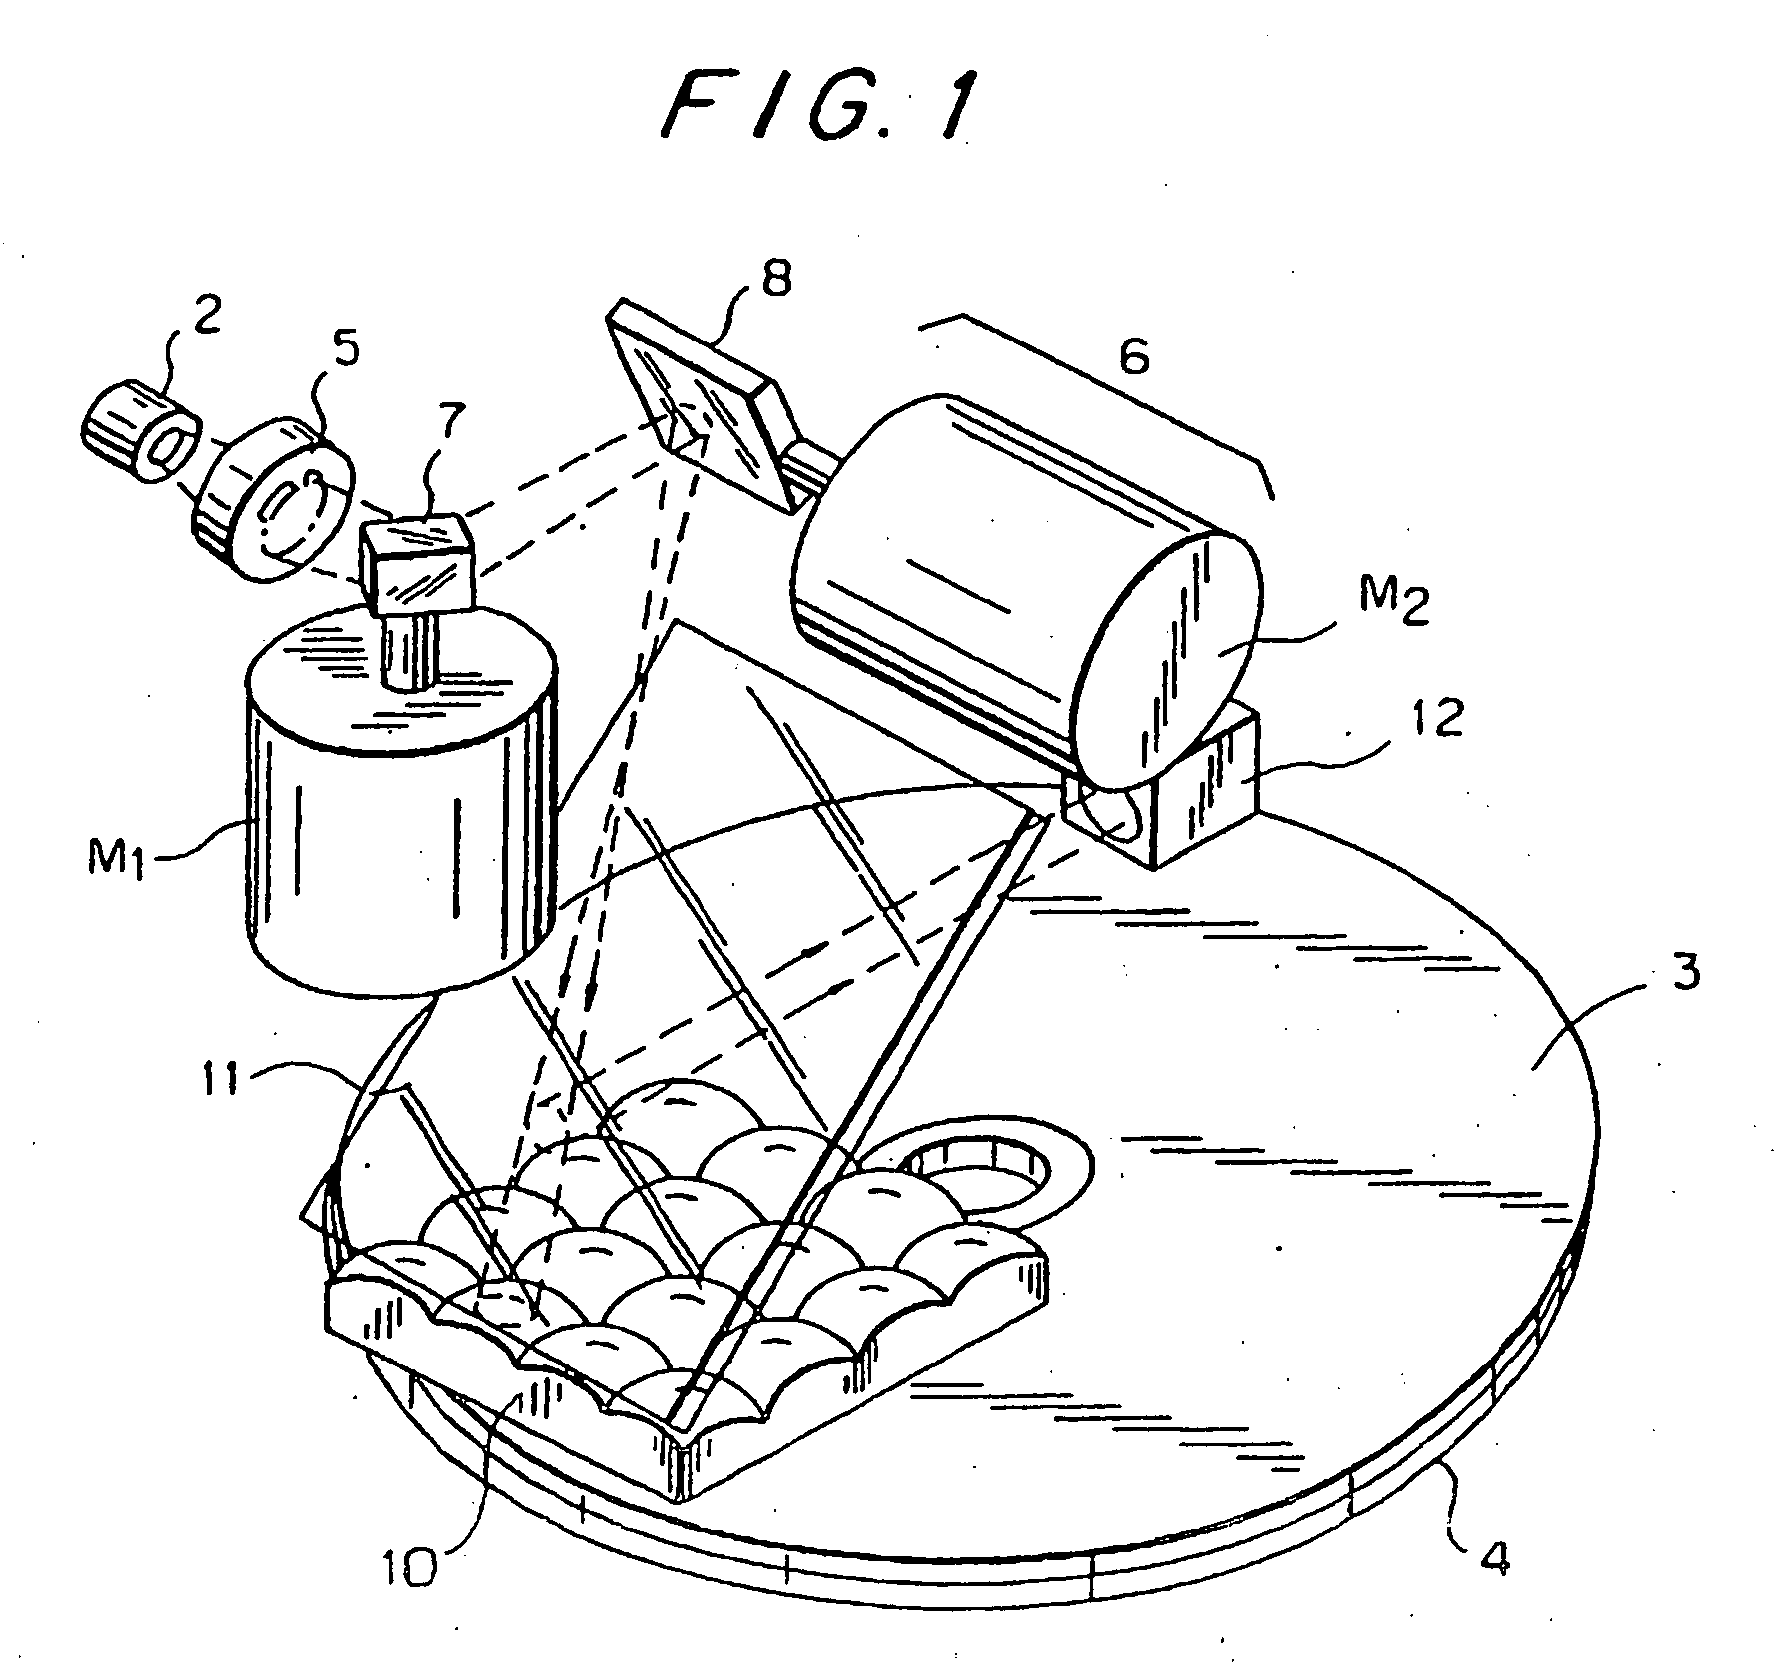 Optical disk drive using one dimensional scanning